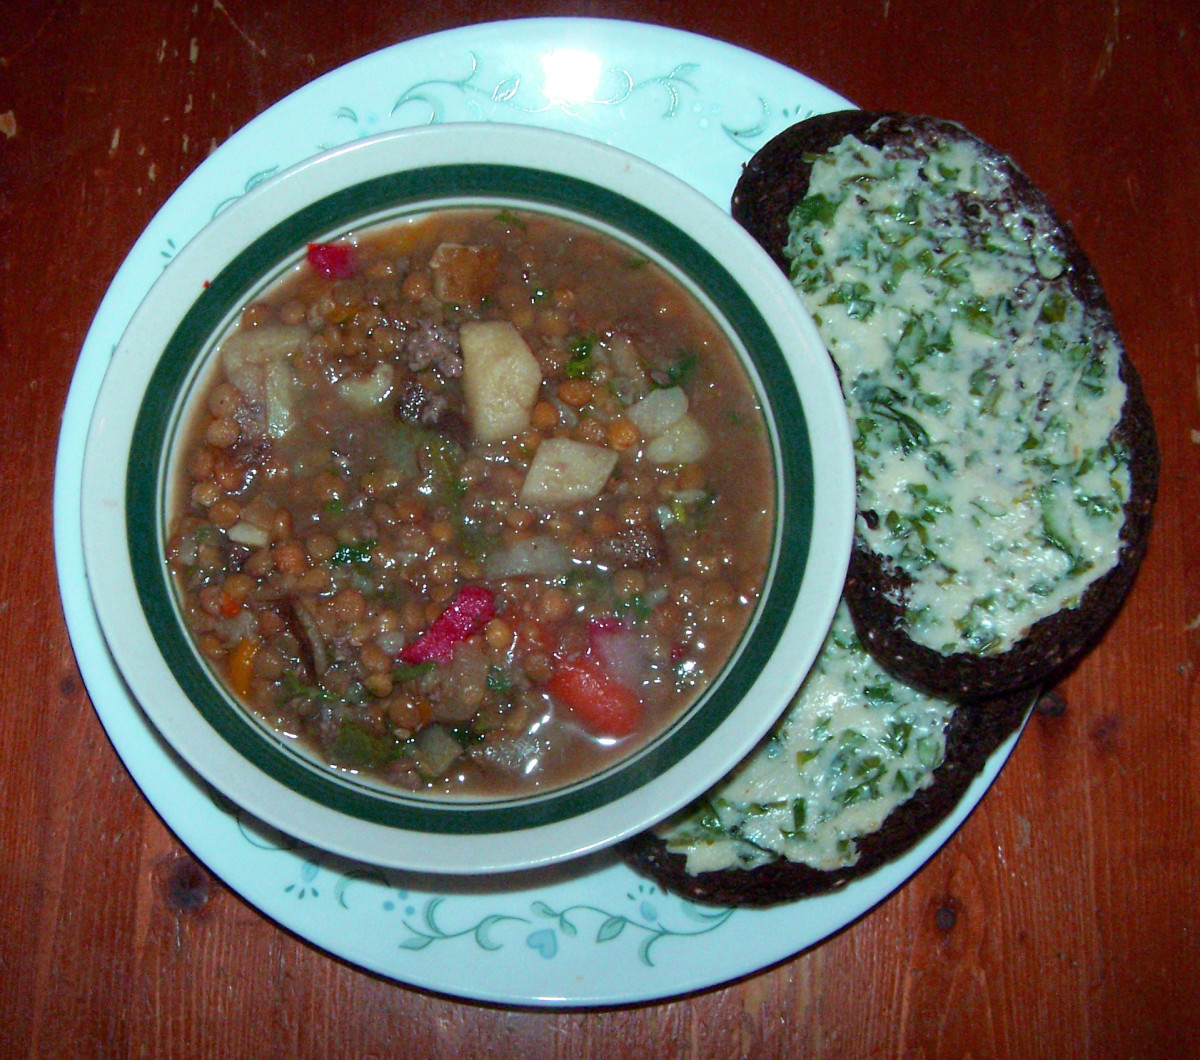 My Mabon dinner was delicious, if I do say so myself. 